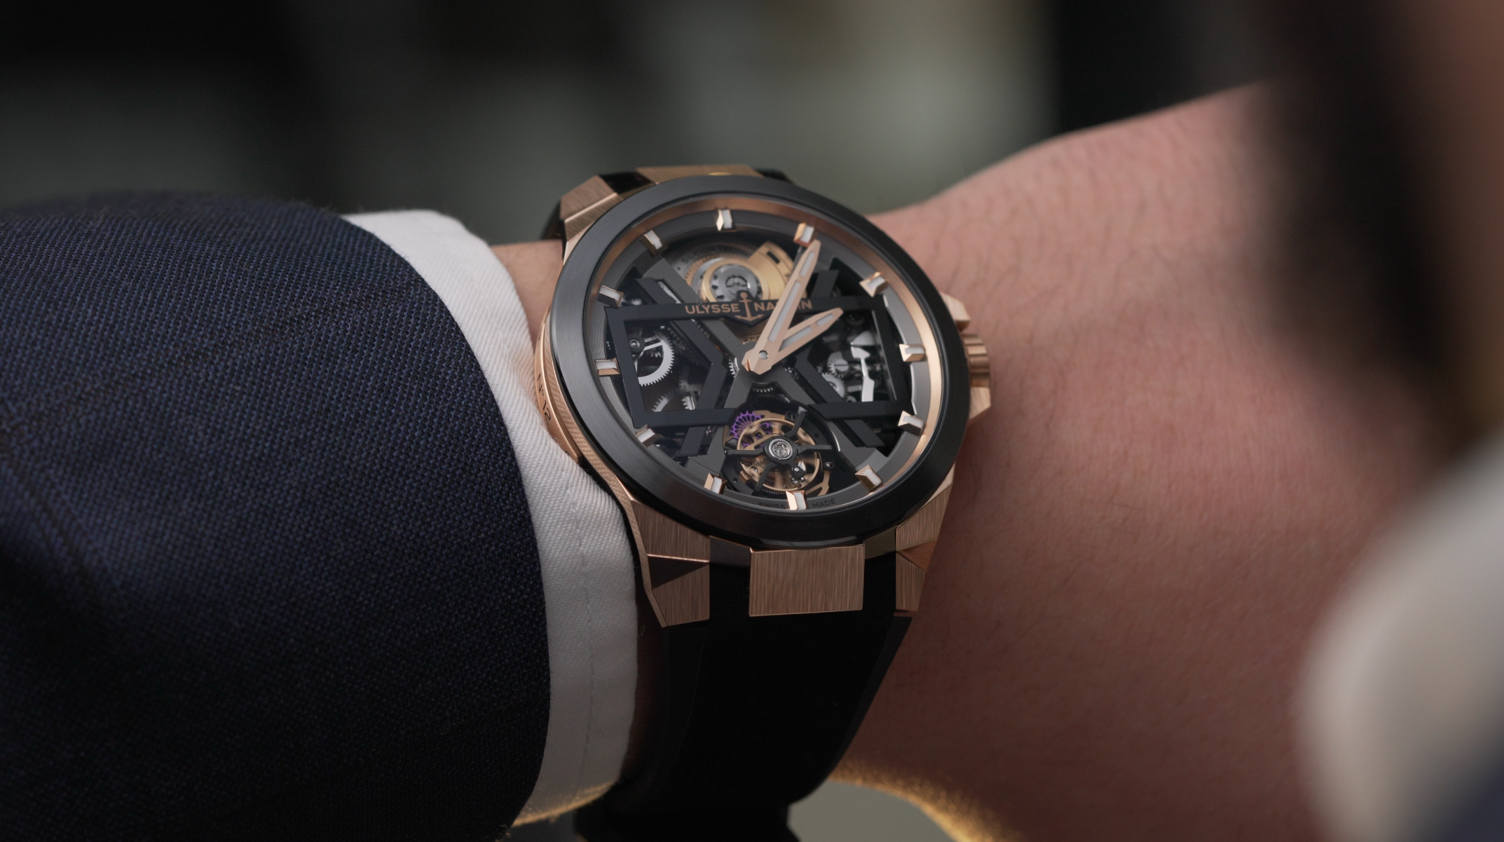 VIDEO: The Ulysse Nardin Blast is a pyrotechnic expression of haute horology